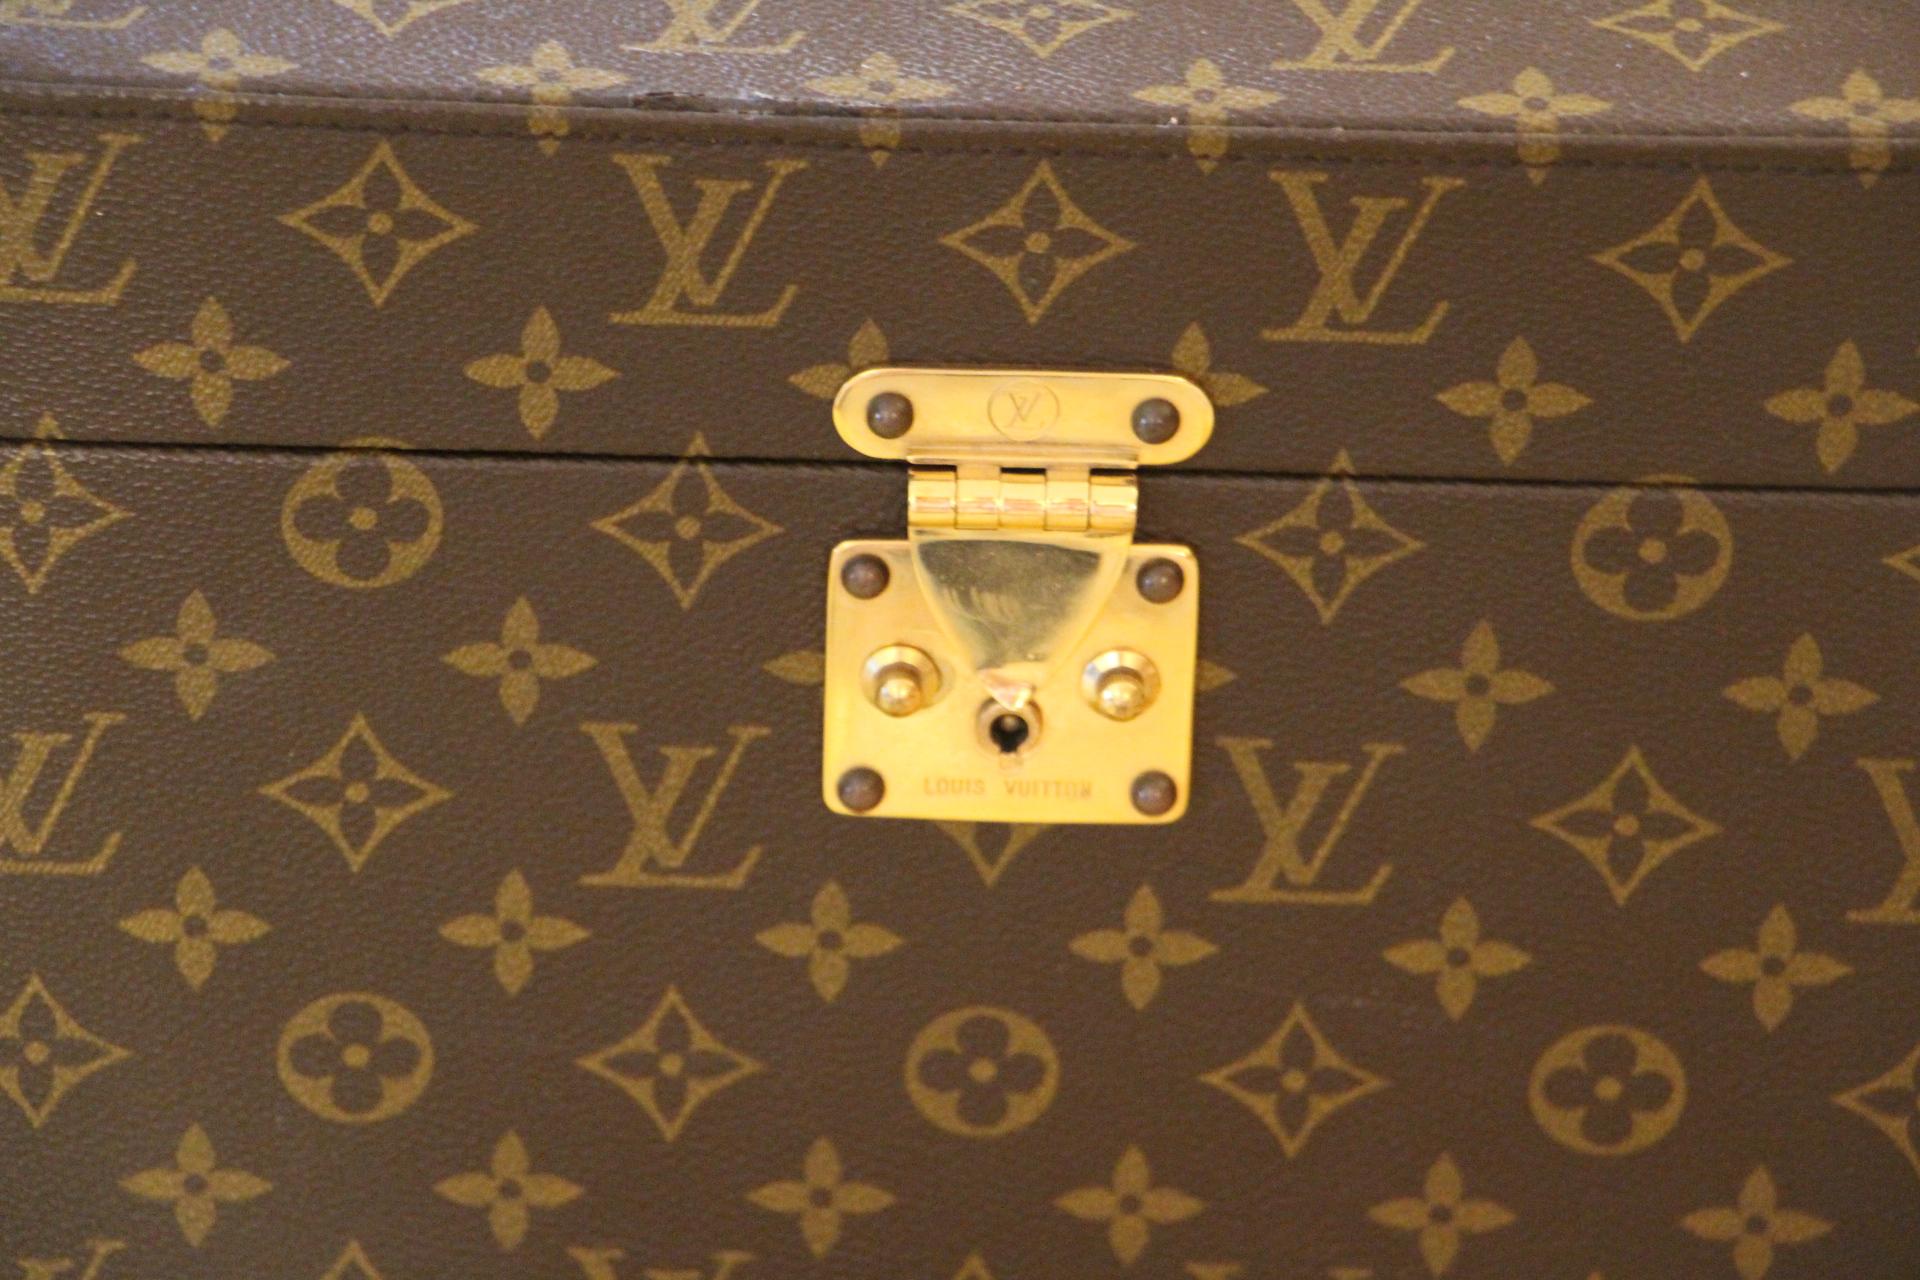 This rigid beauty case features monogram canvas and solid brass stamped Louis Vuitton lock. Its leather strap is adjustable and has a magnificent patina.
Its interior is in beige canvas with eather straps for holding materials. Under its lid there